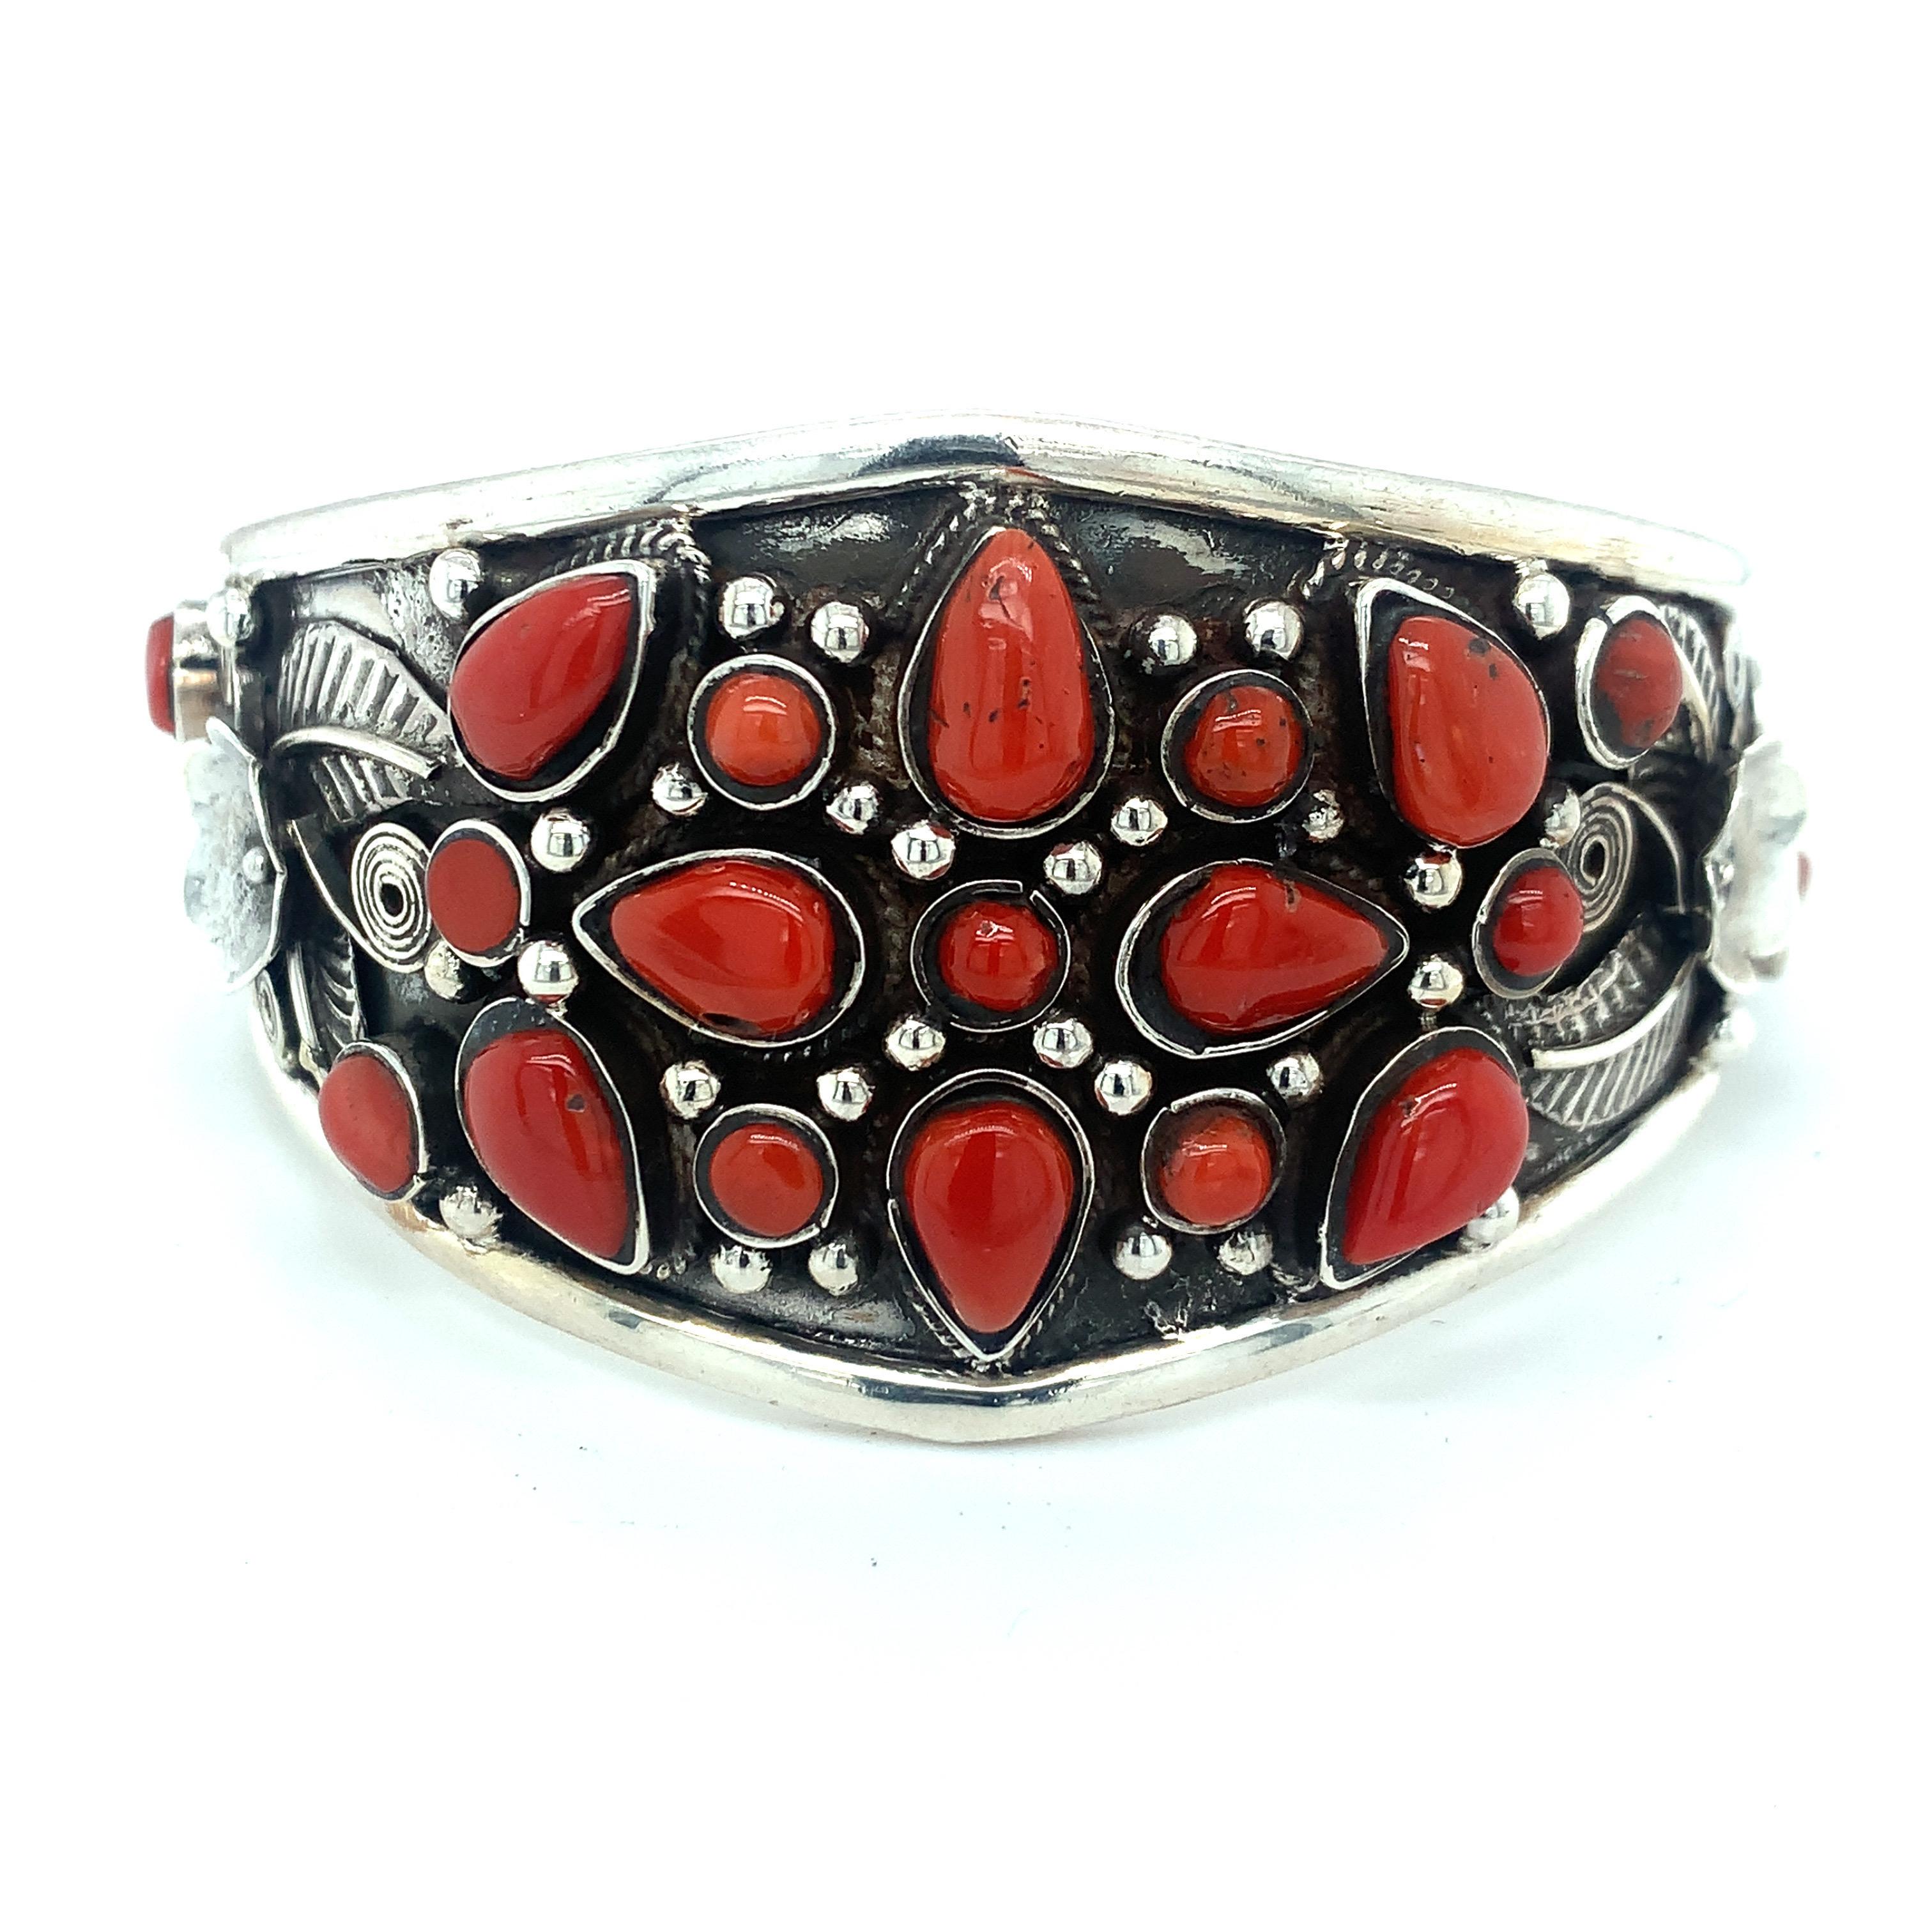 The bangle is one of a kind hand crafted by skilled silversmiths ,This is really reasonably priced  coral are cut and polished by members of same family so not extra cost paid to stone supplier. This is brand new piece designed by family members of